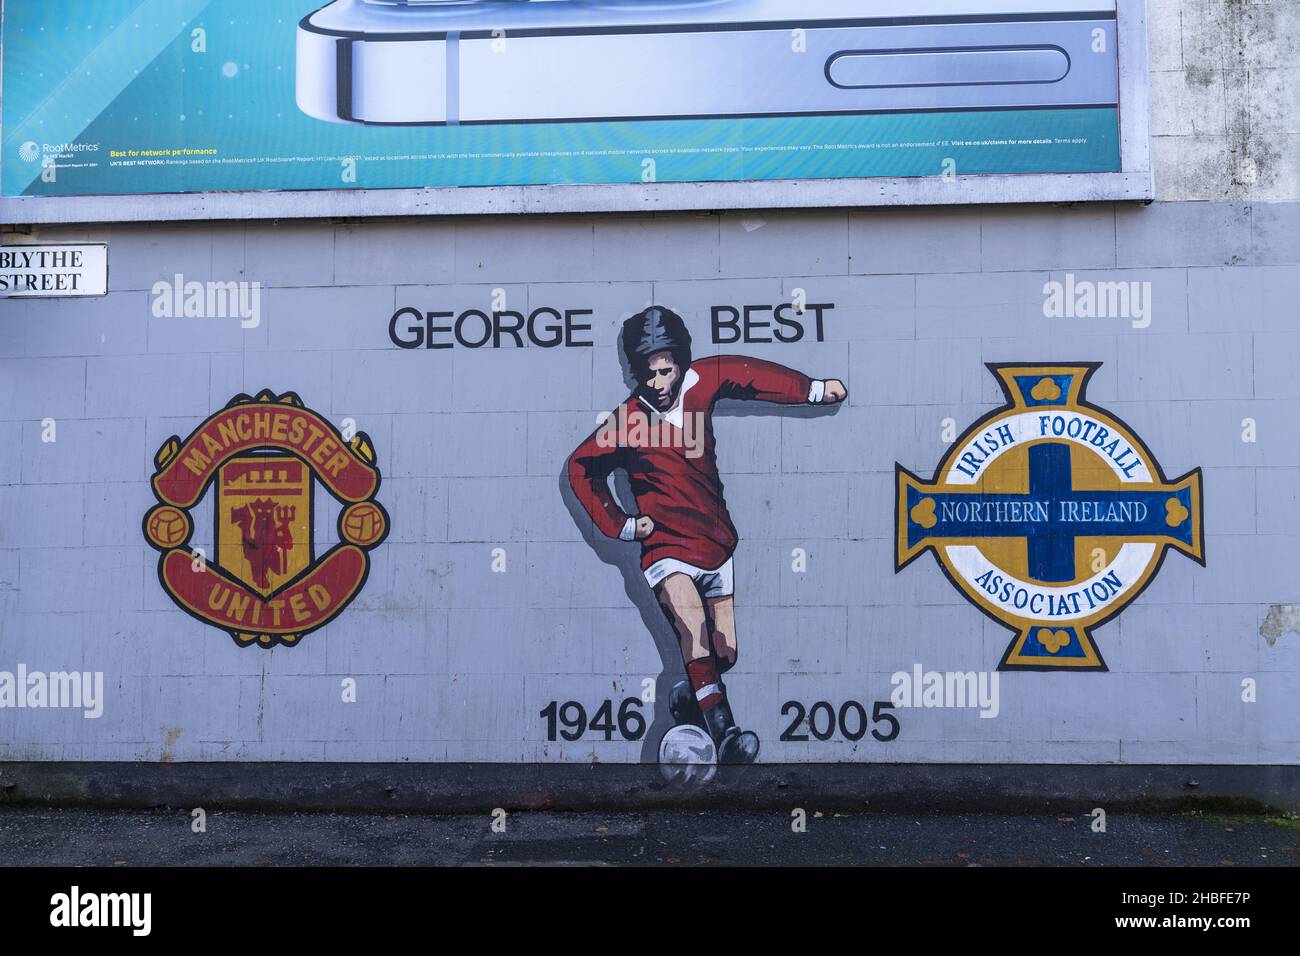 BELFAST, UNITED KINGDOM - Nov 02, 2021: A George Best mural with Manchester United and Northern Ireland soccer team logos in Belfast, UK Stock Photo